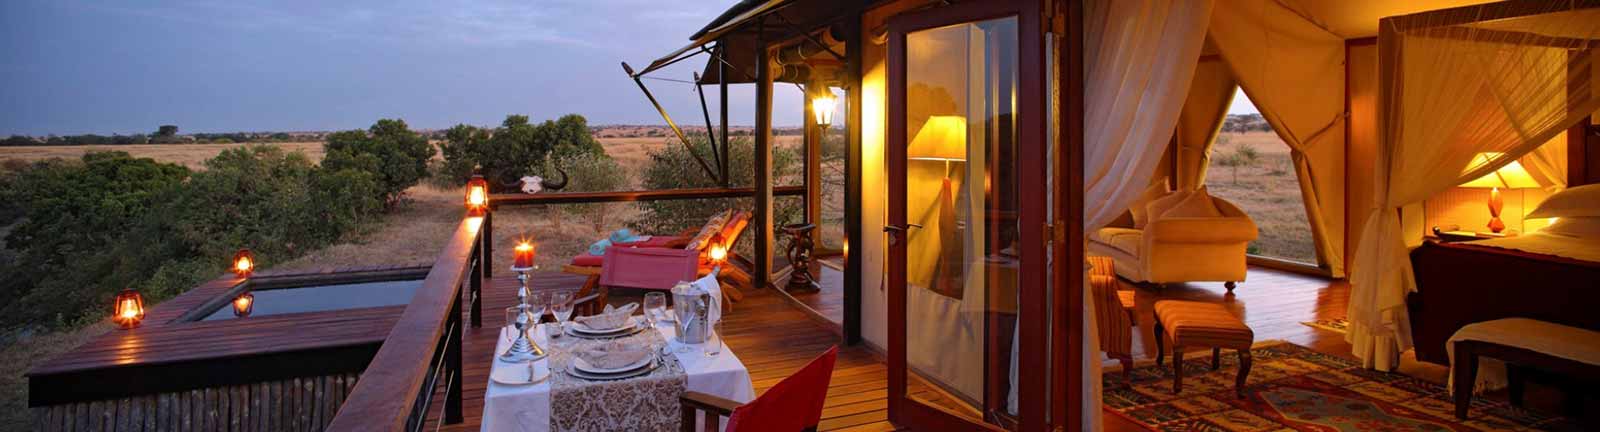 Luxury Hotels and Resorts in Tanzania